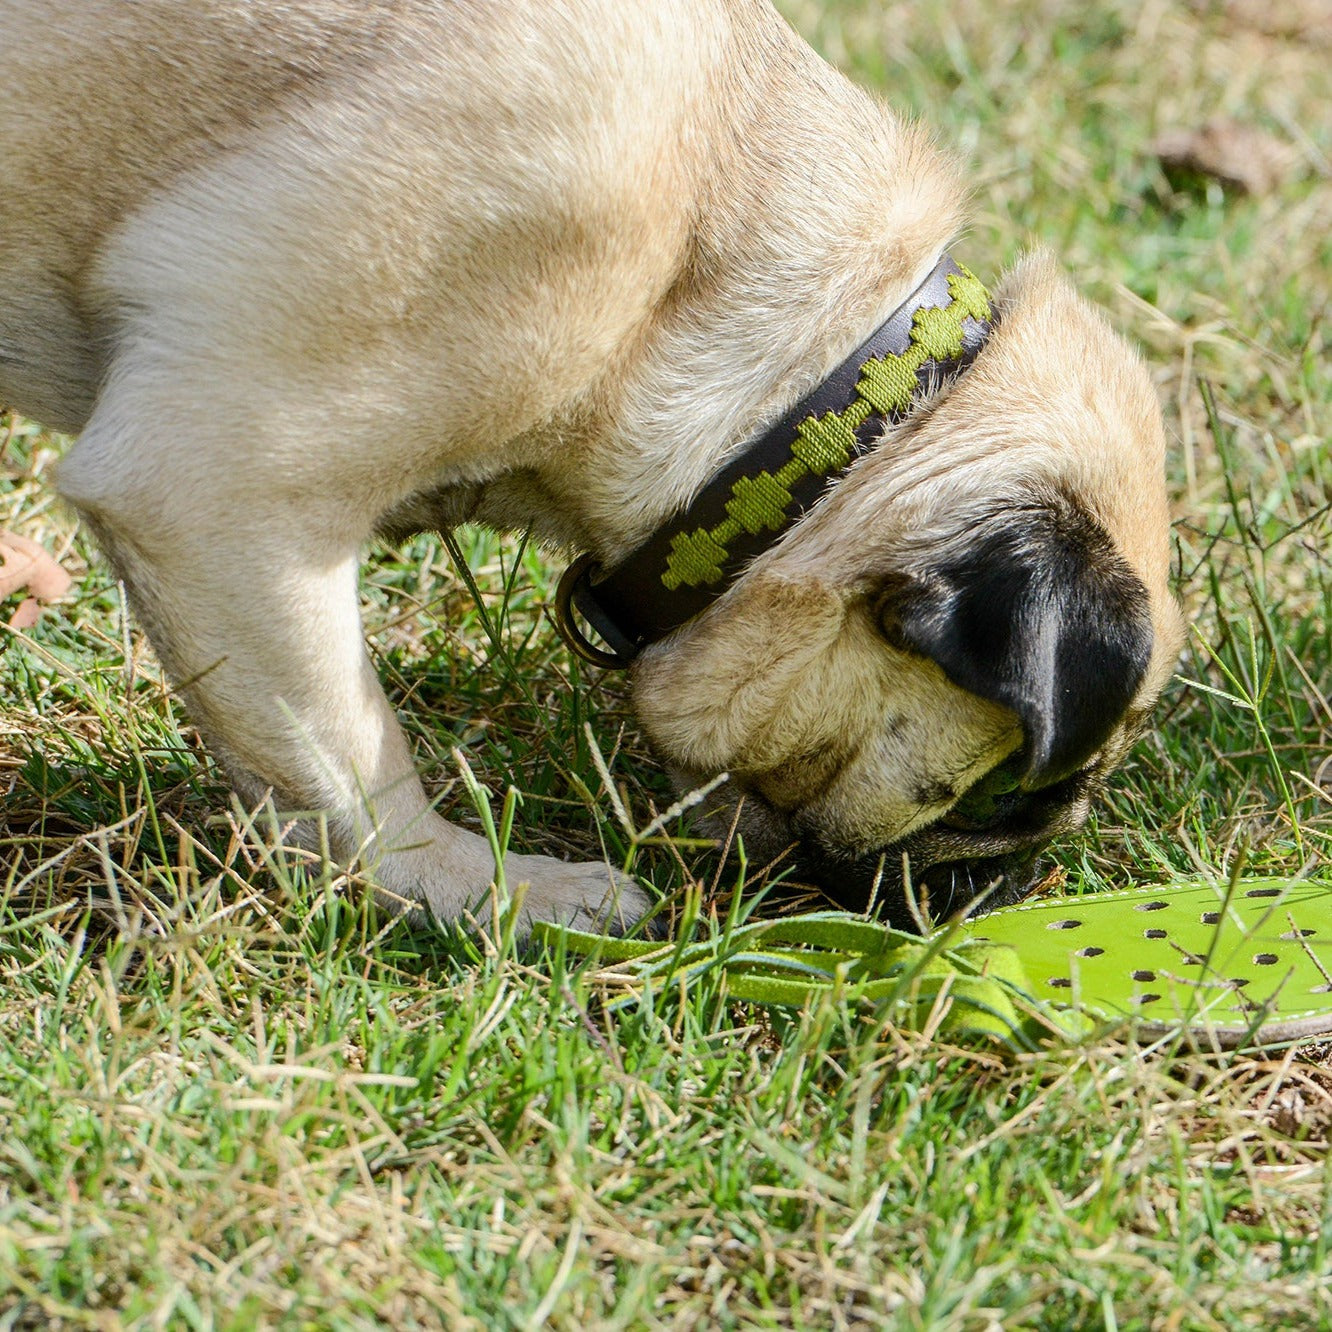 A pug with a Georgie Paws Polo Bark Collar in grass color intently sniffs a neon green frisbee on a grassy field, showcasing a moment of playful curiosity or the beginning of a fun game.